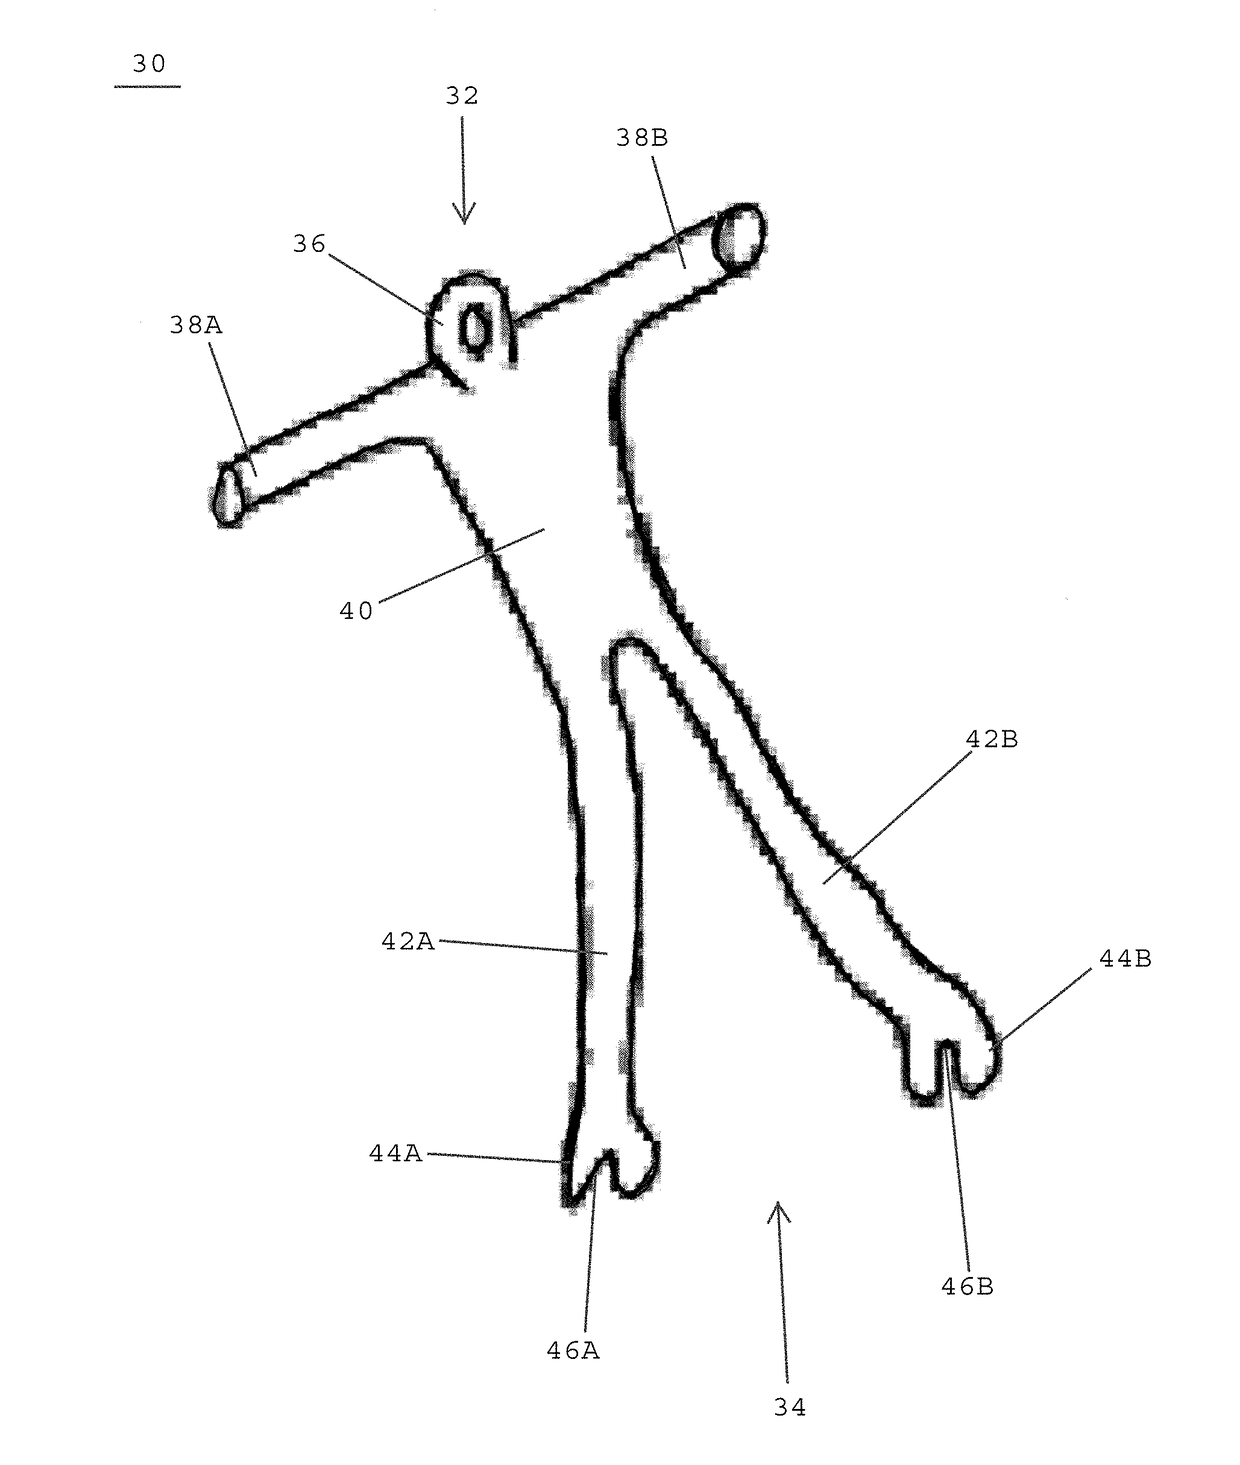 Tongue suspension system with hyoid-extender for treating obstructive sleep apnea